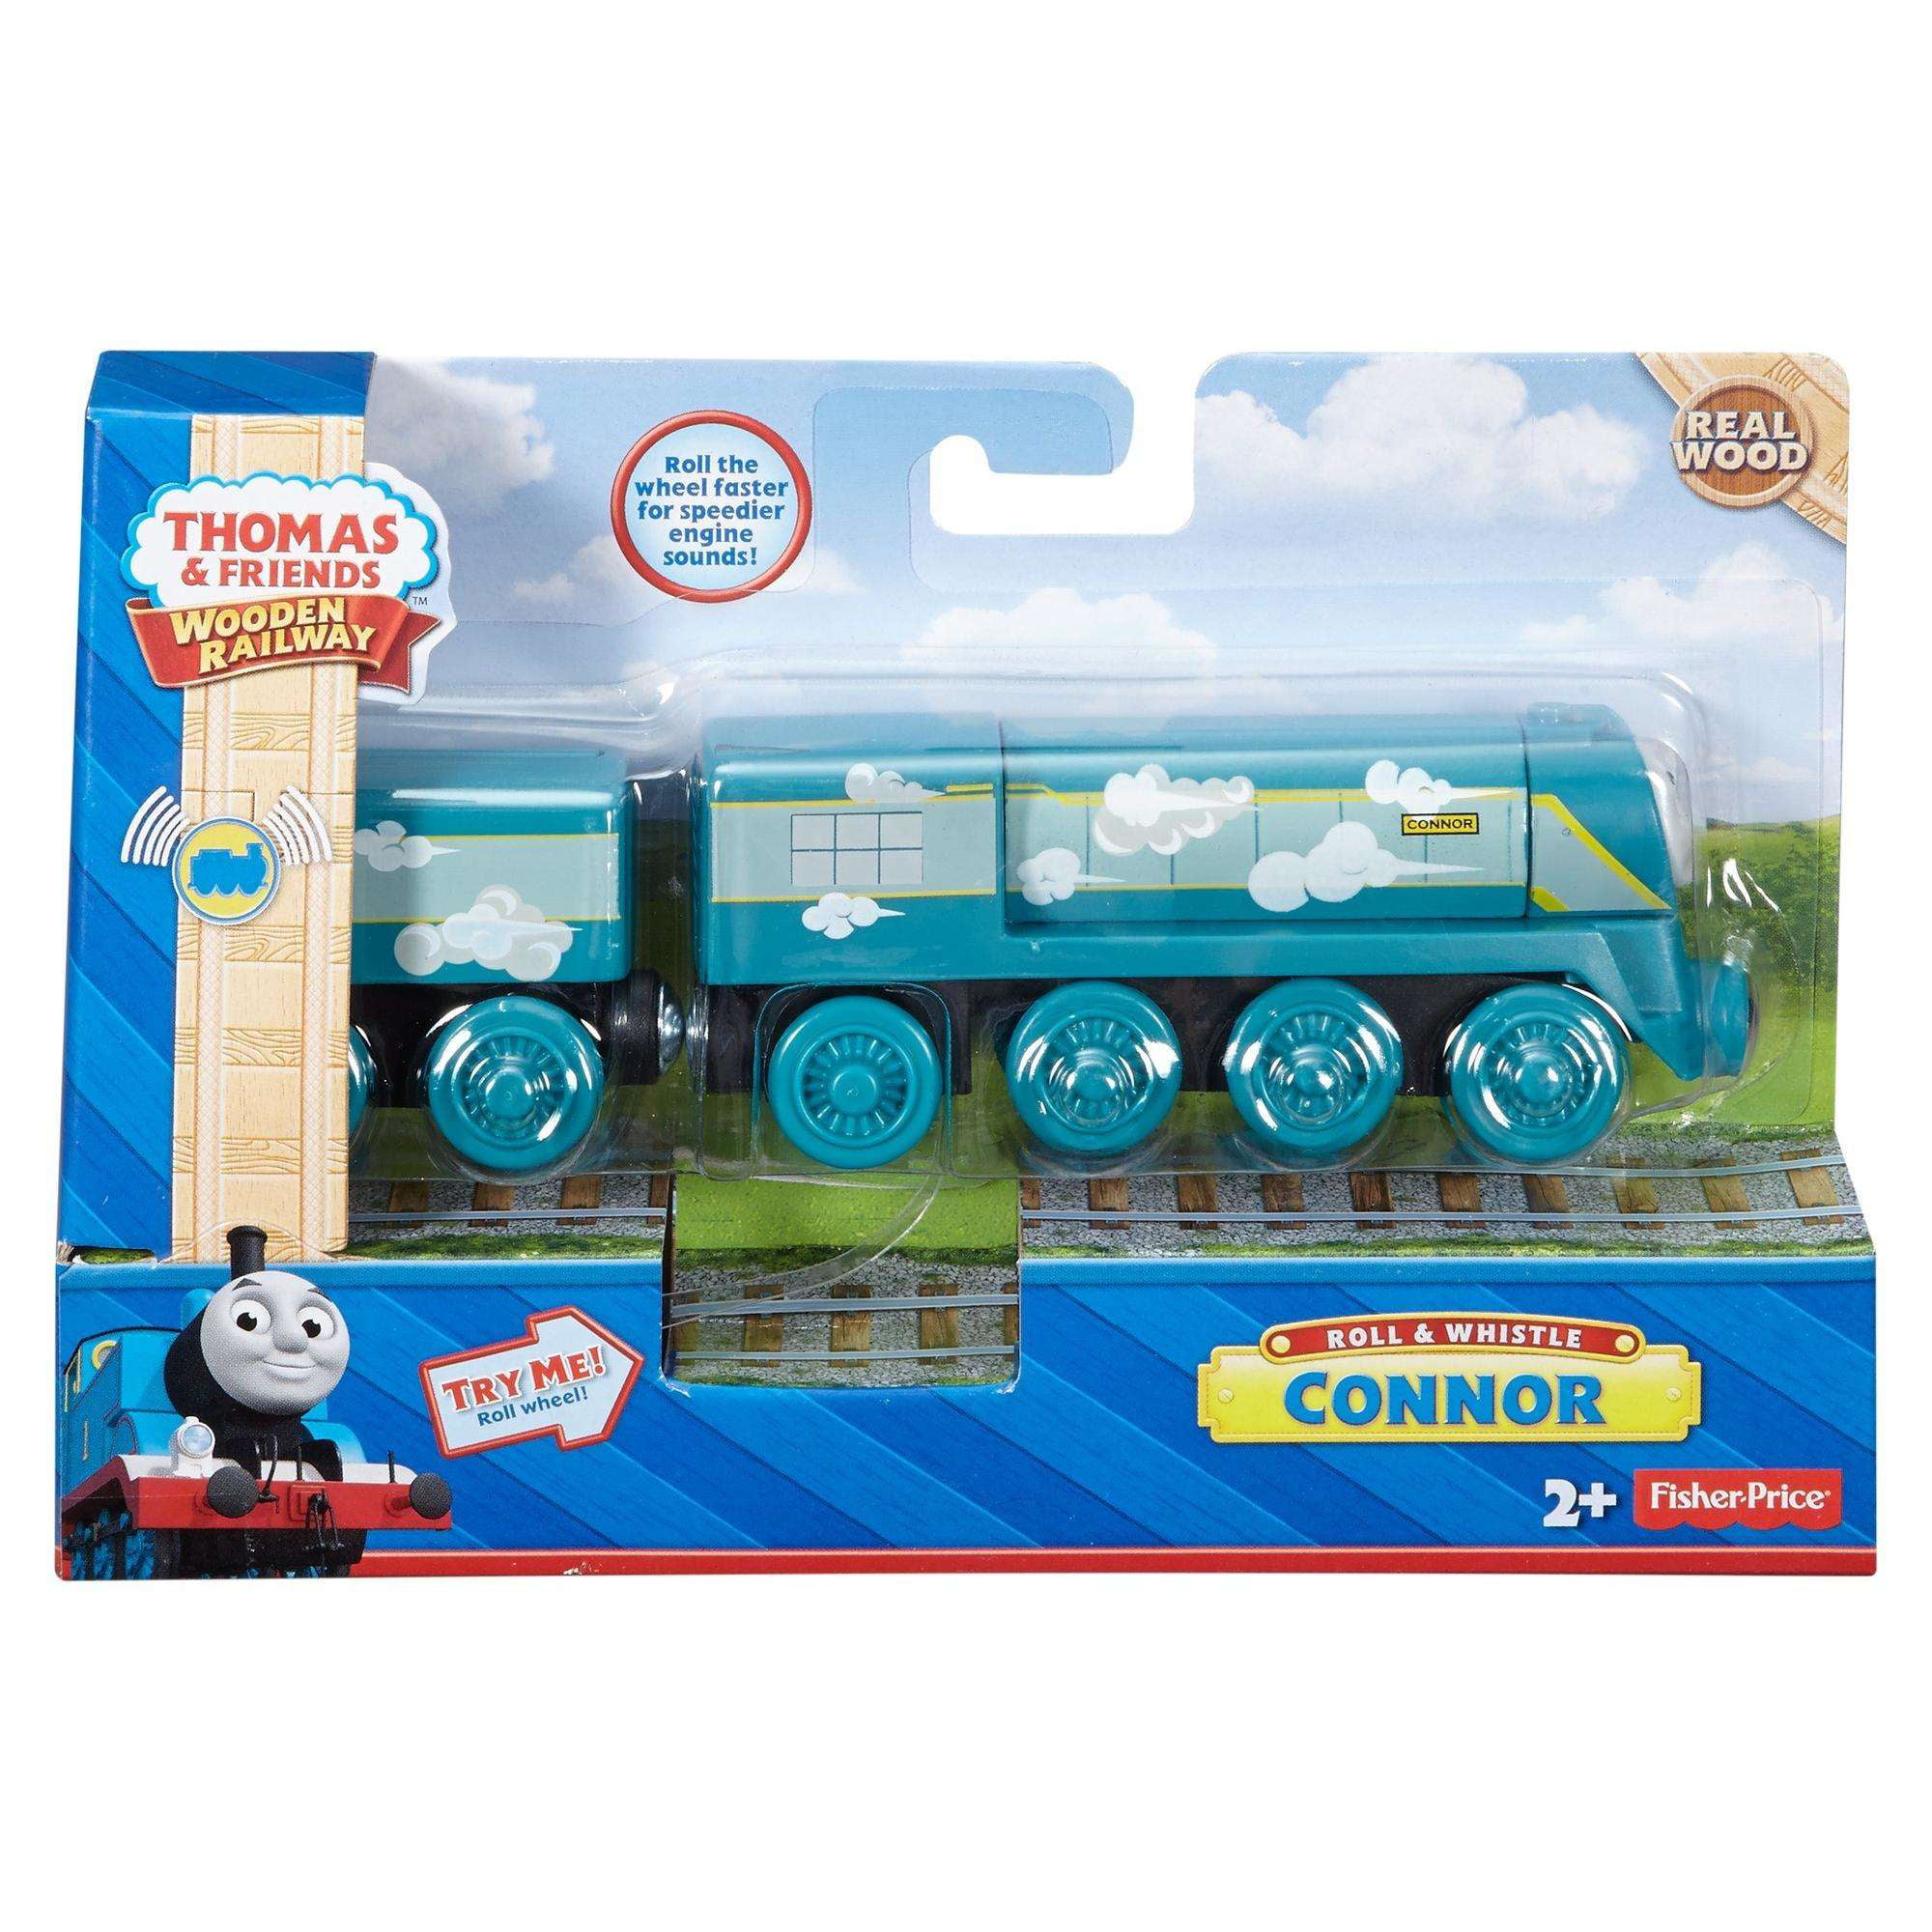 Battery Operated Roll & Whistle Connor Fisher-Price Thomas & Friends Wooden Railway 